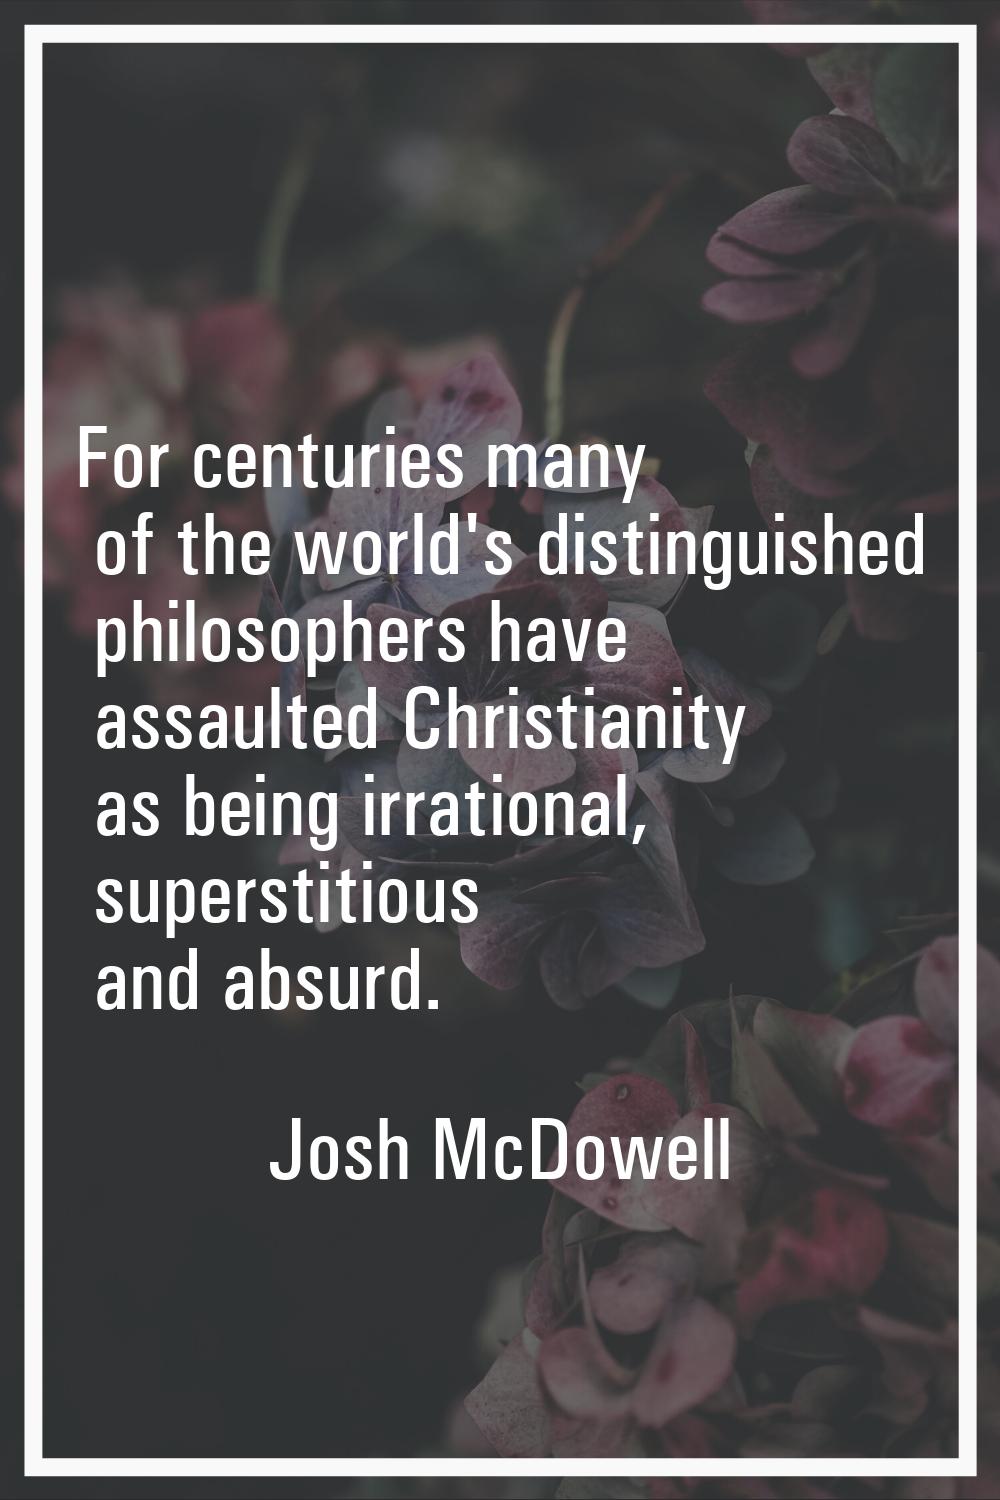 For centuries many of the world's distinguished philosophers have assaulted Christianity as being i